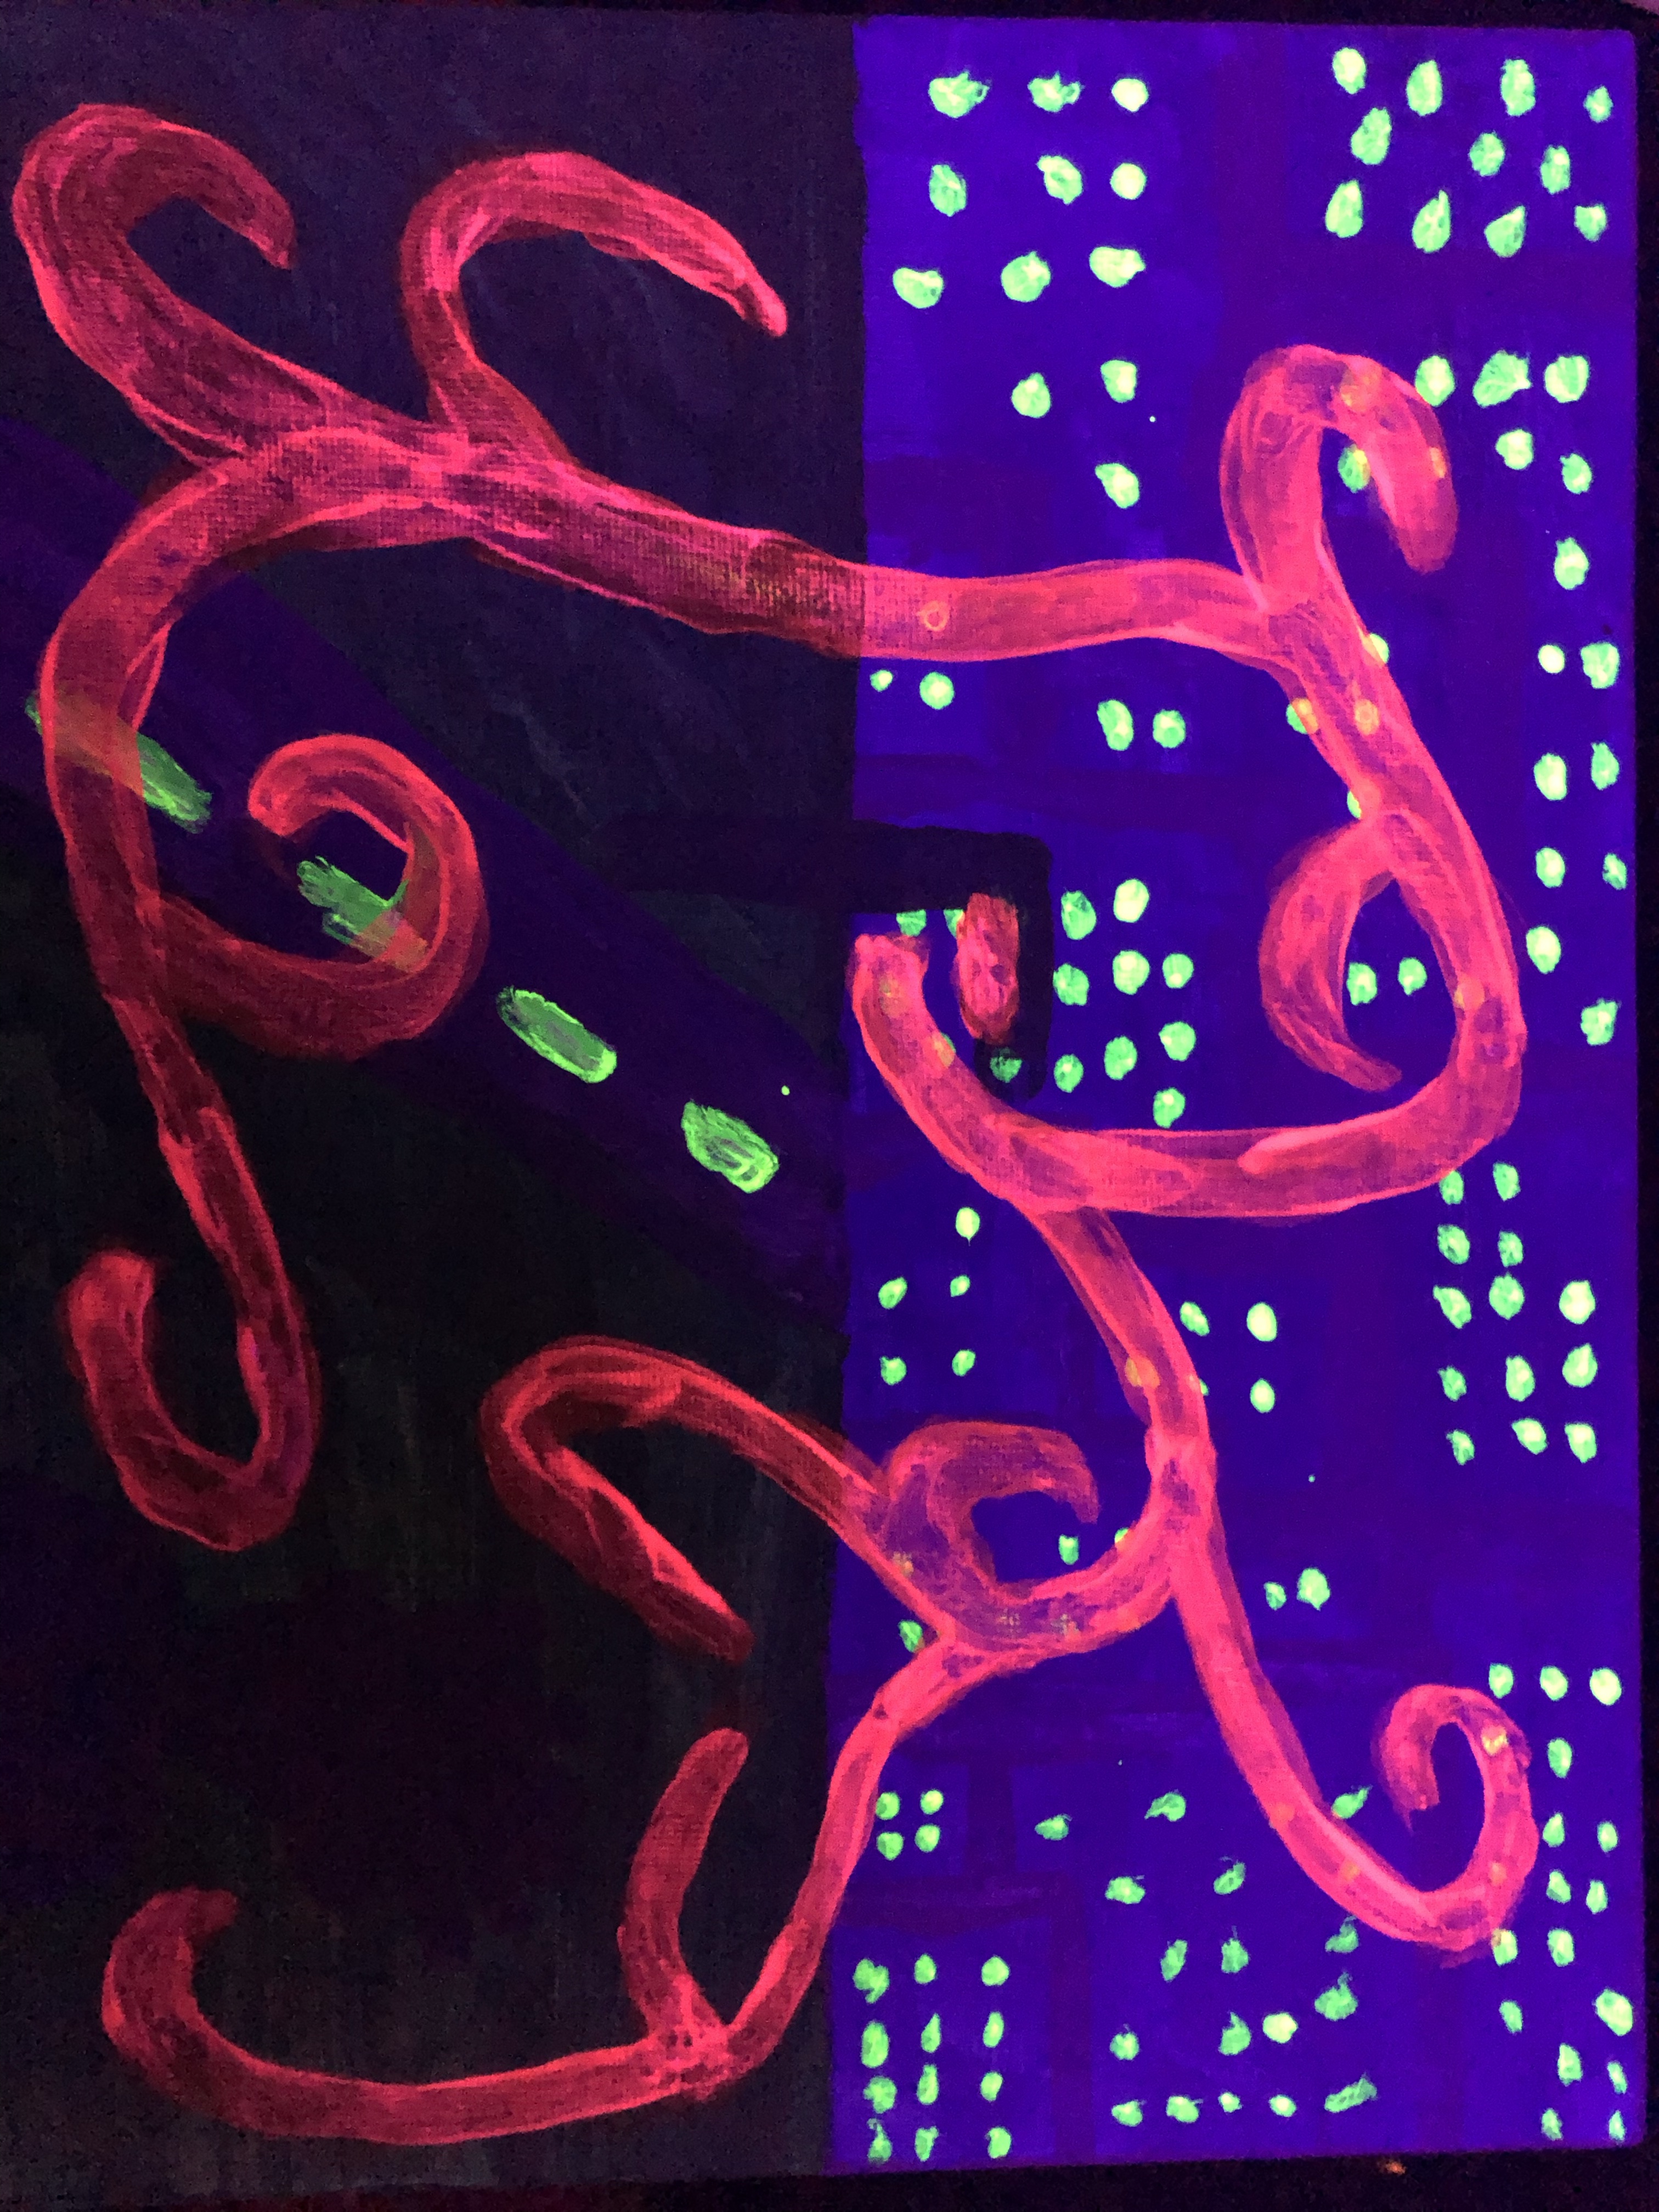 neon painting under blacklight: road leading to cityscape in background, with pink substance spiraling out across the canvas from a streetlight